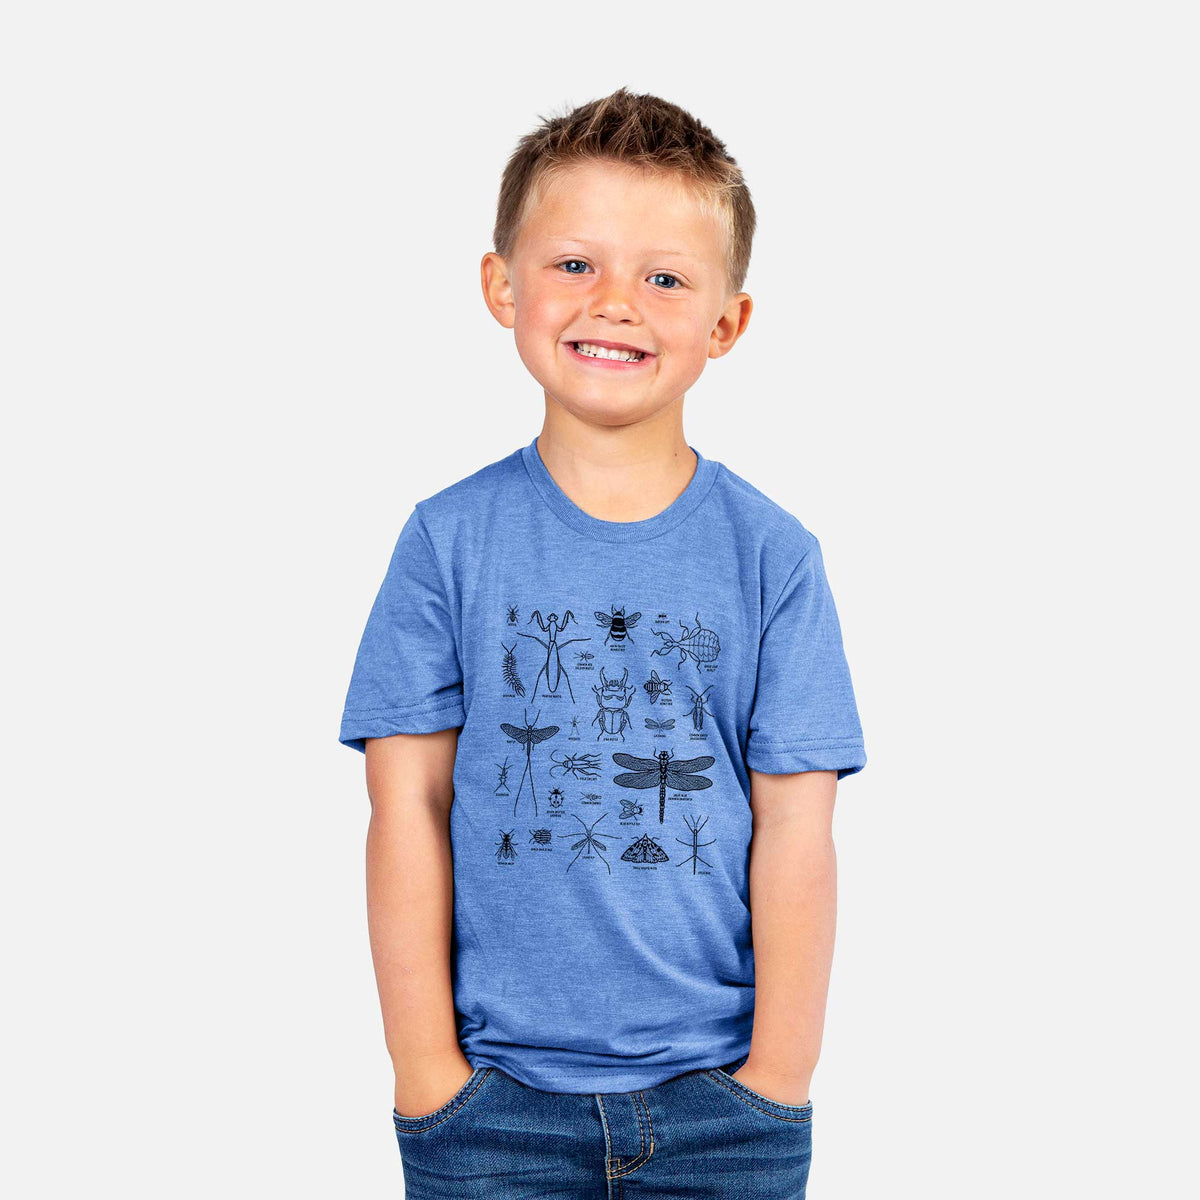 Chart of Arthropods/Insects - Kids Shirt